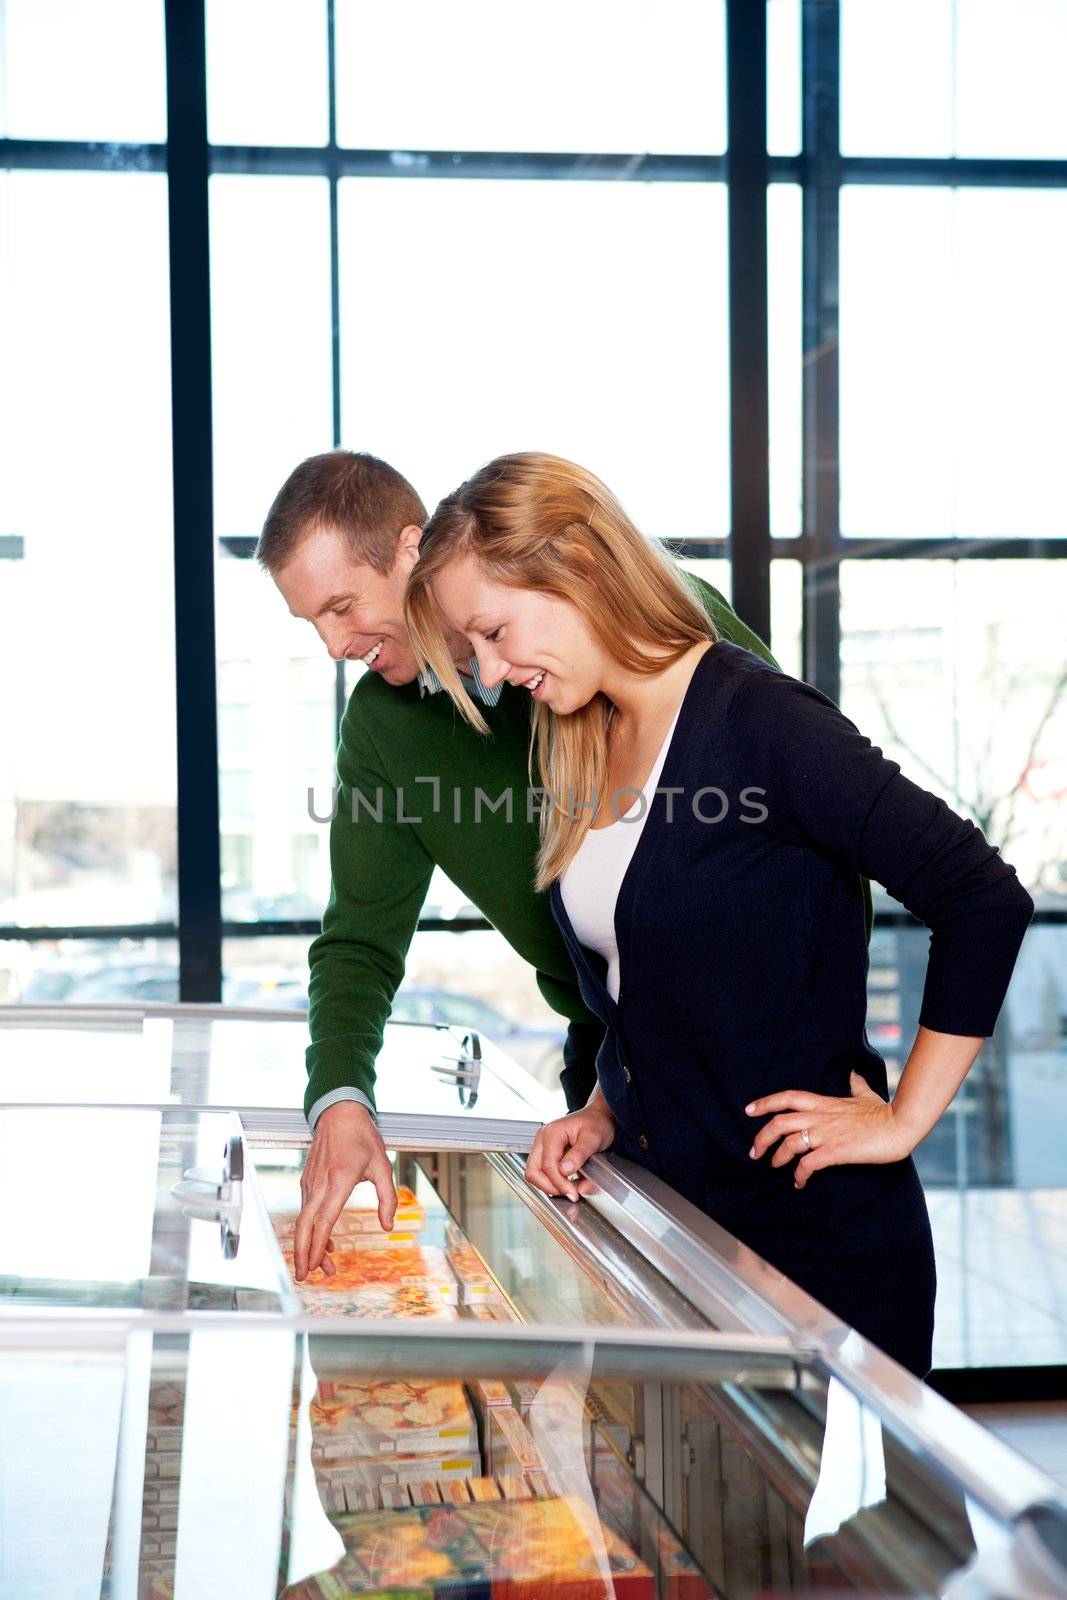 A happy couple in a supermarket buying frozen food